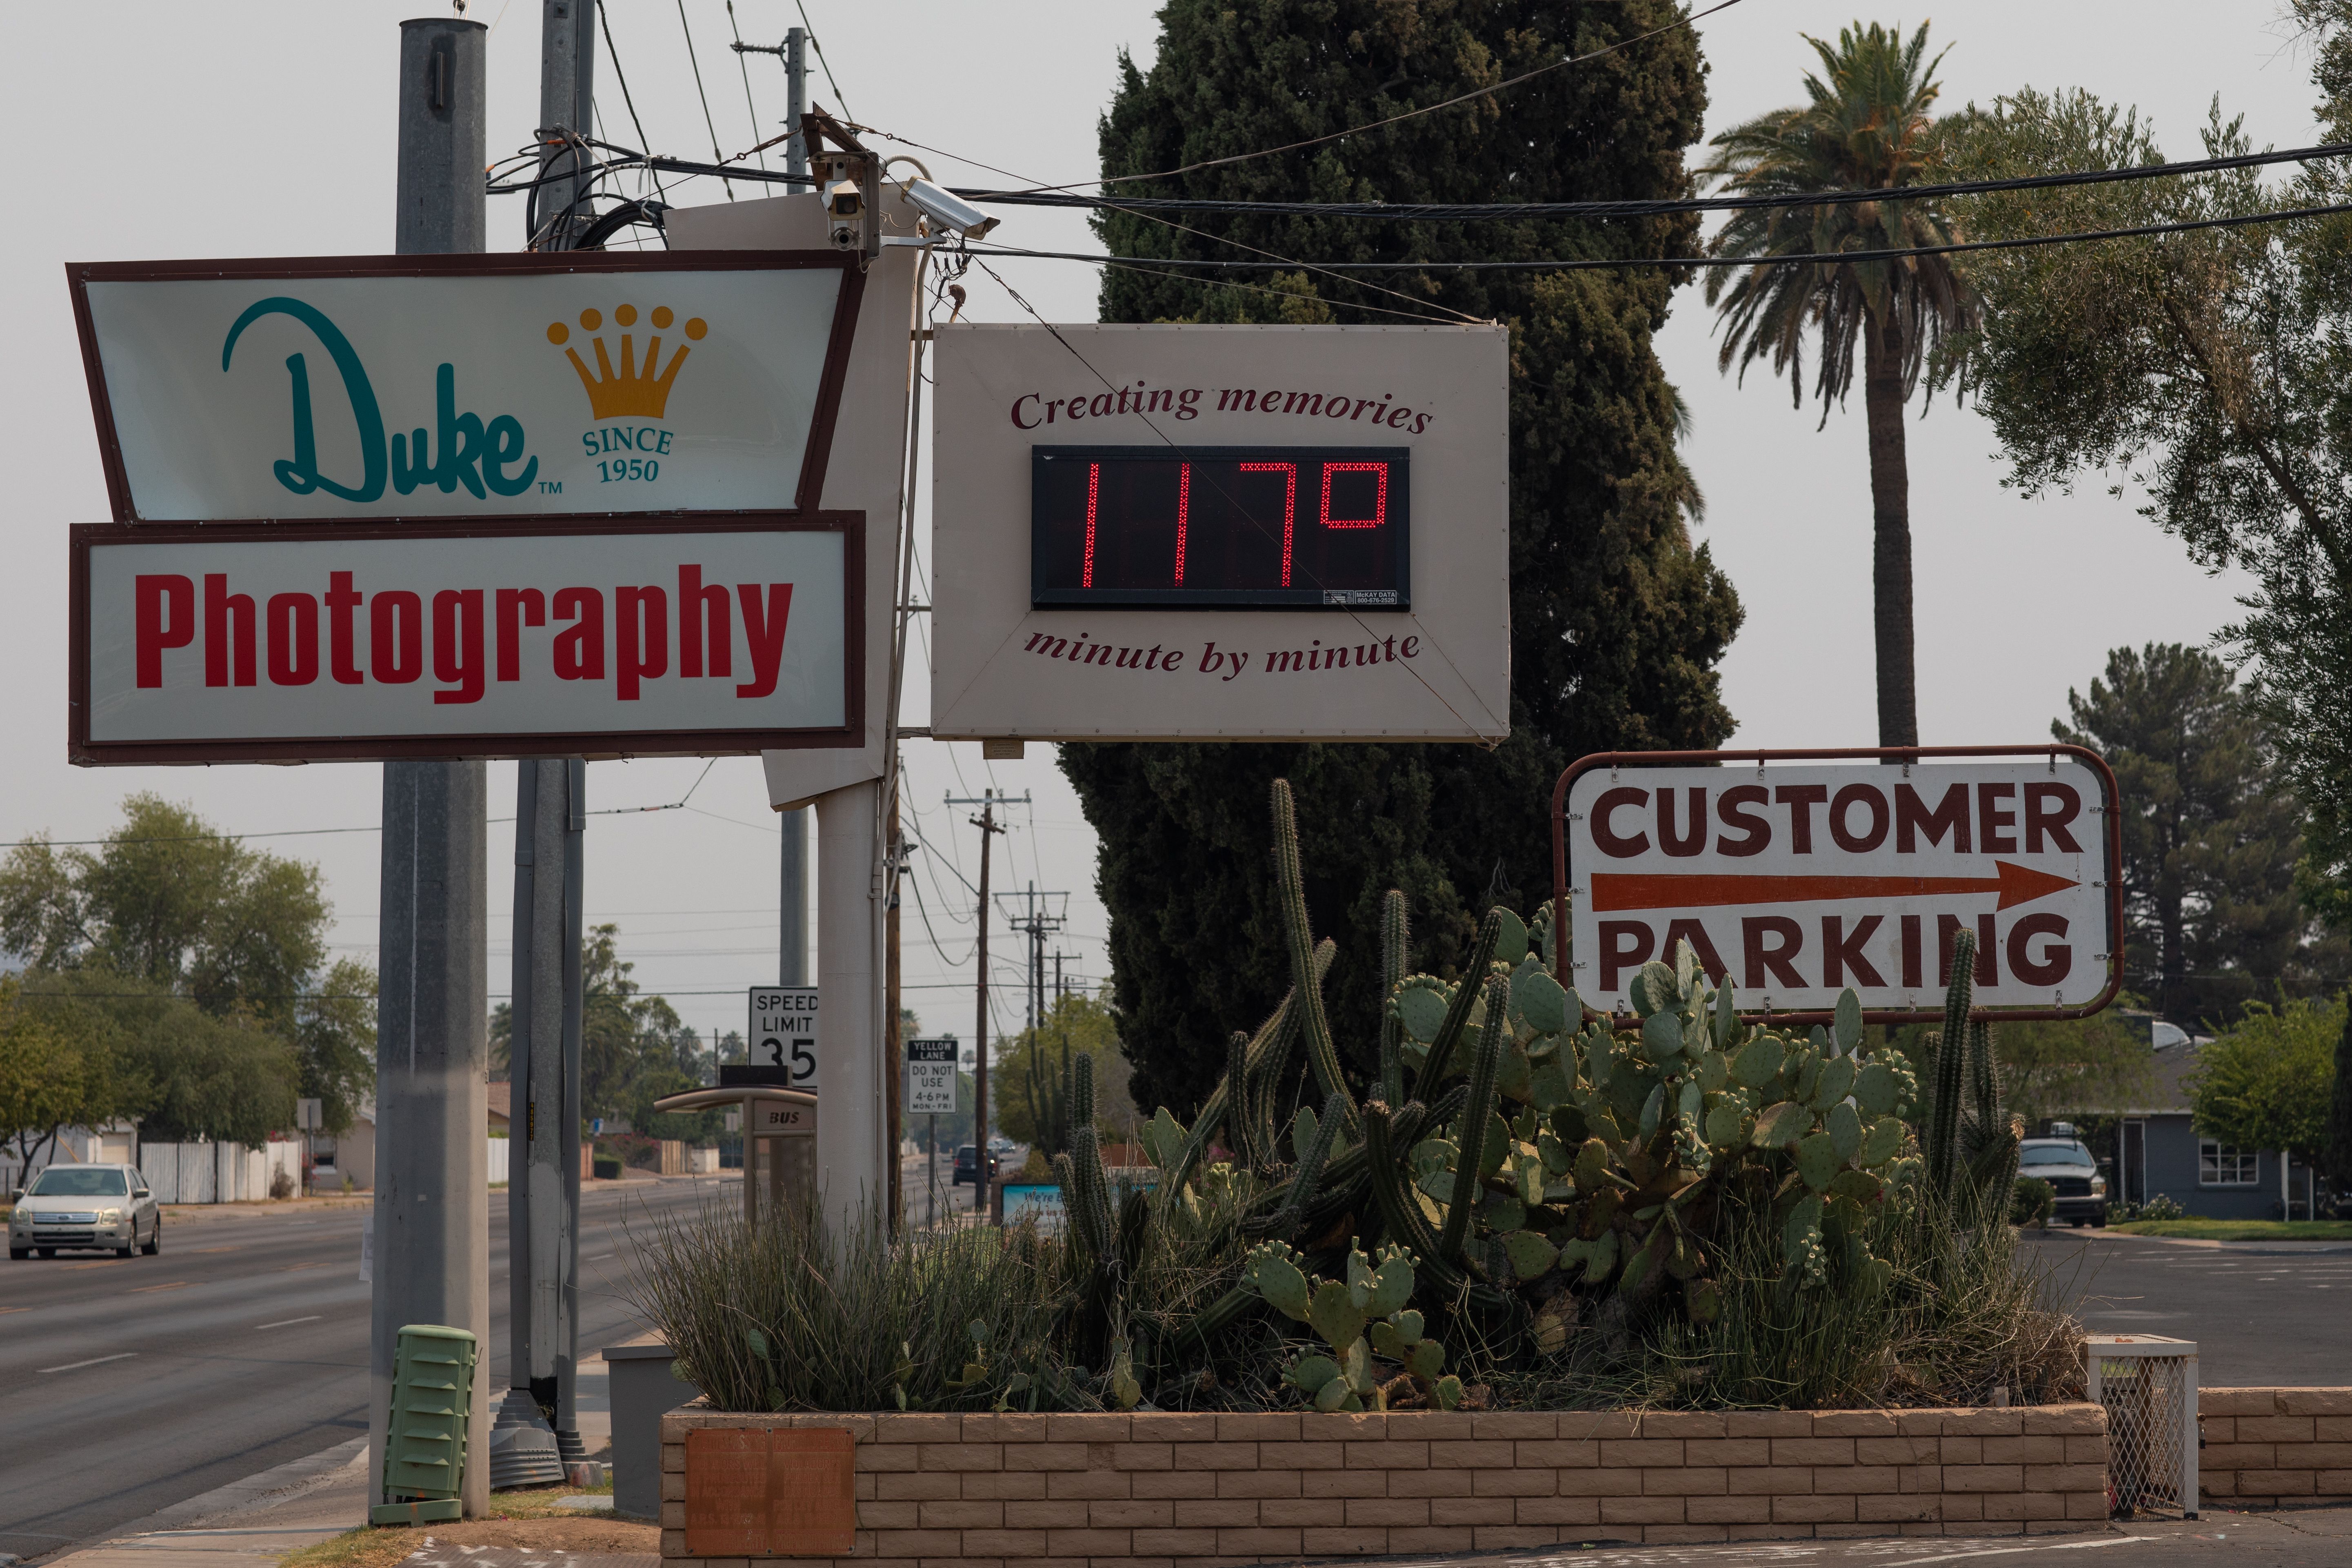 A thermometer sign displays a temperature of 117 degrees Fahrenheit 